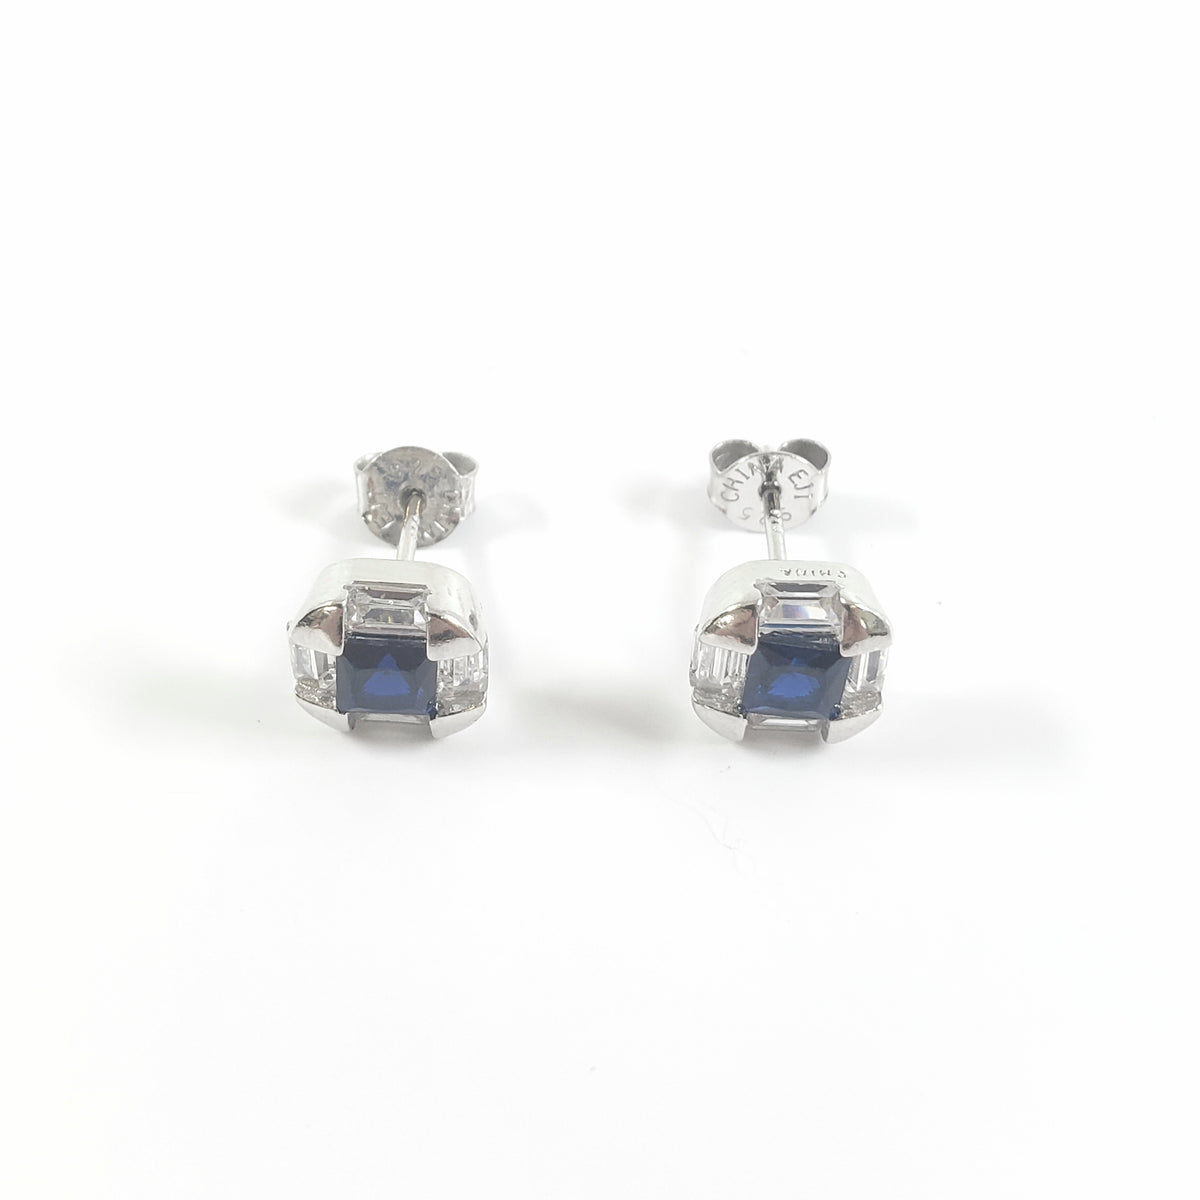 925 Sterling Silver Blue and Clear Cubic Zirconia Stud Earrings - 8mm x 8mm